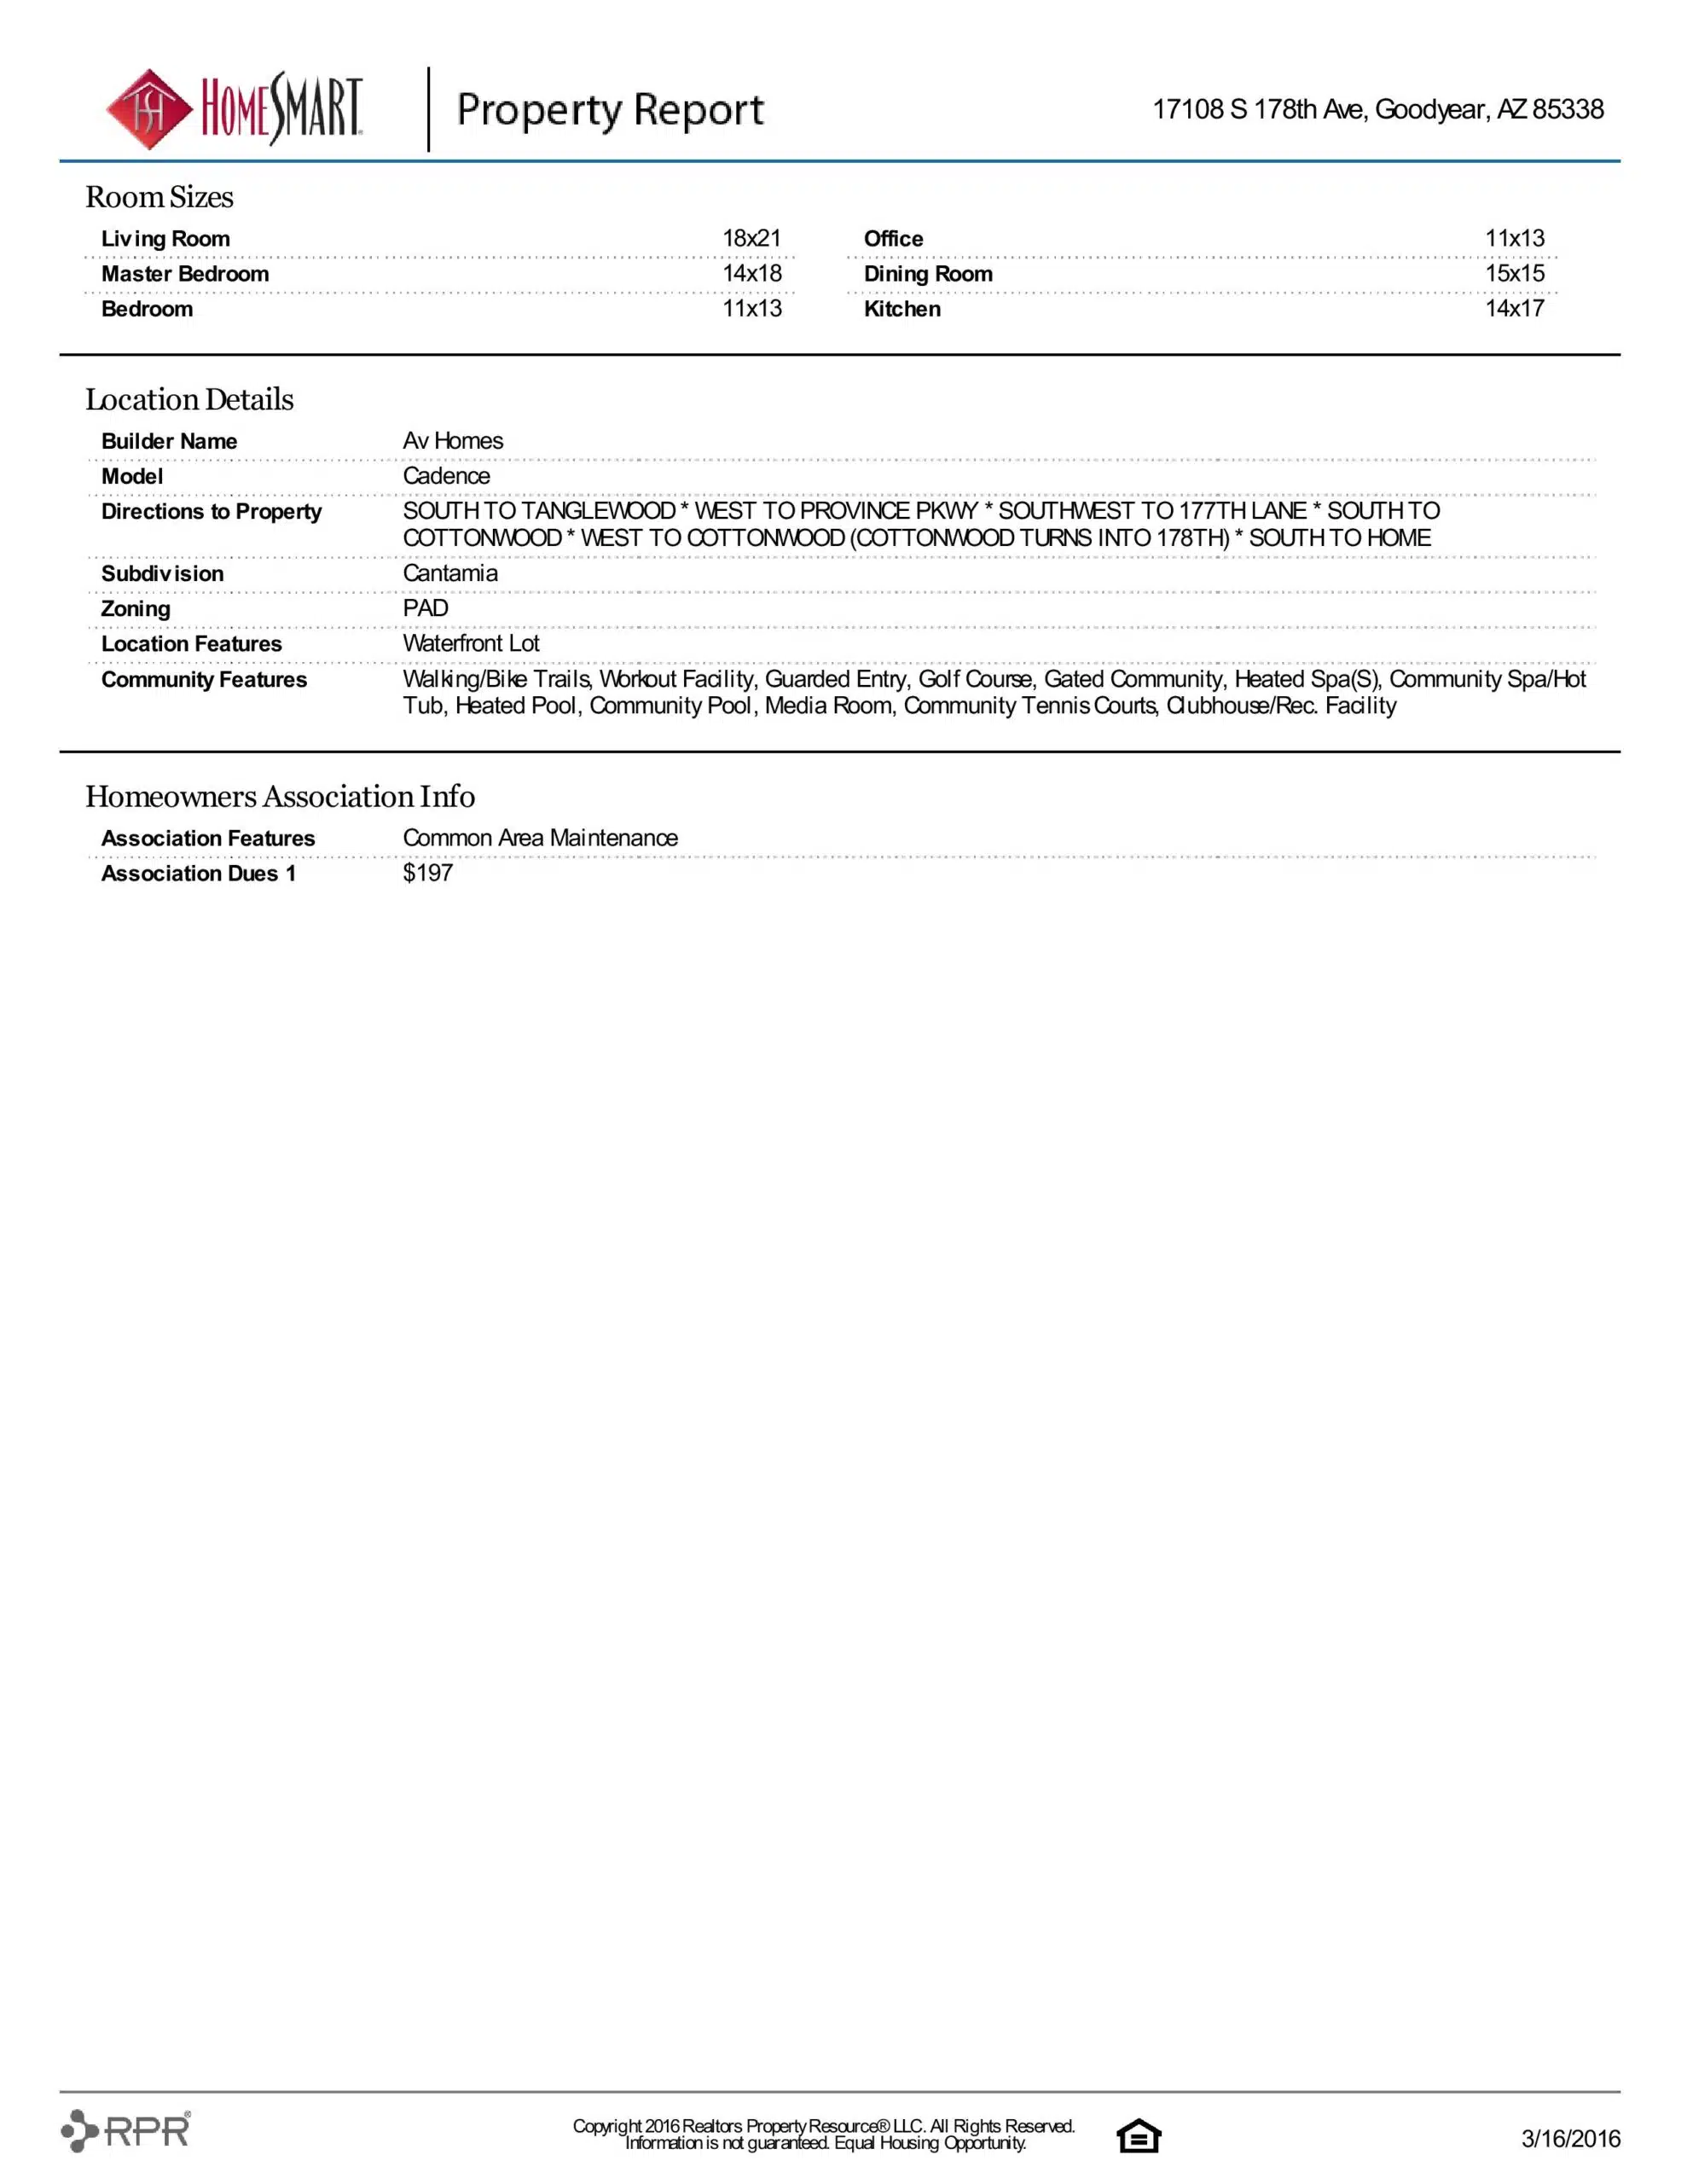 17108 S 178TH AVE PROPERTY REPORT-page-005